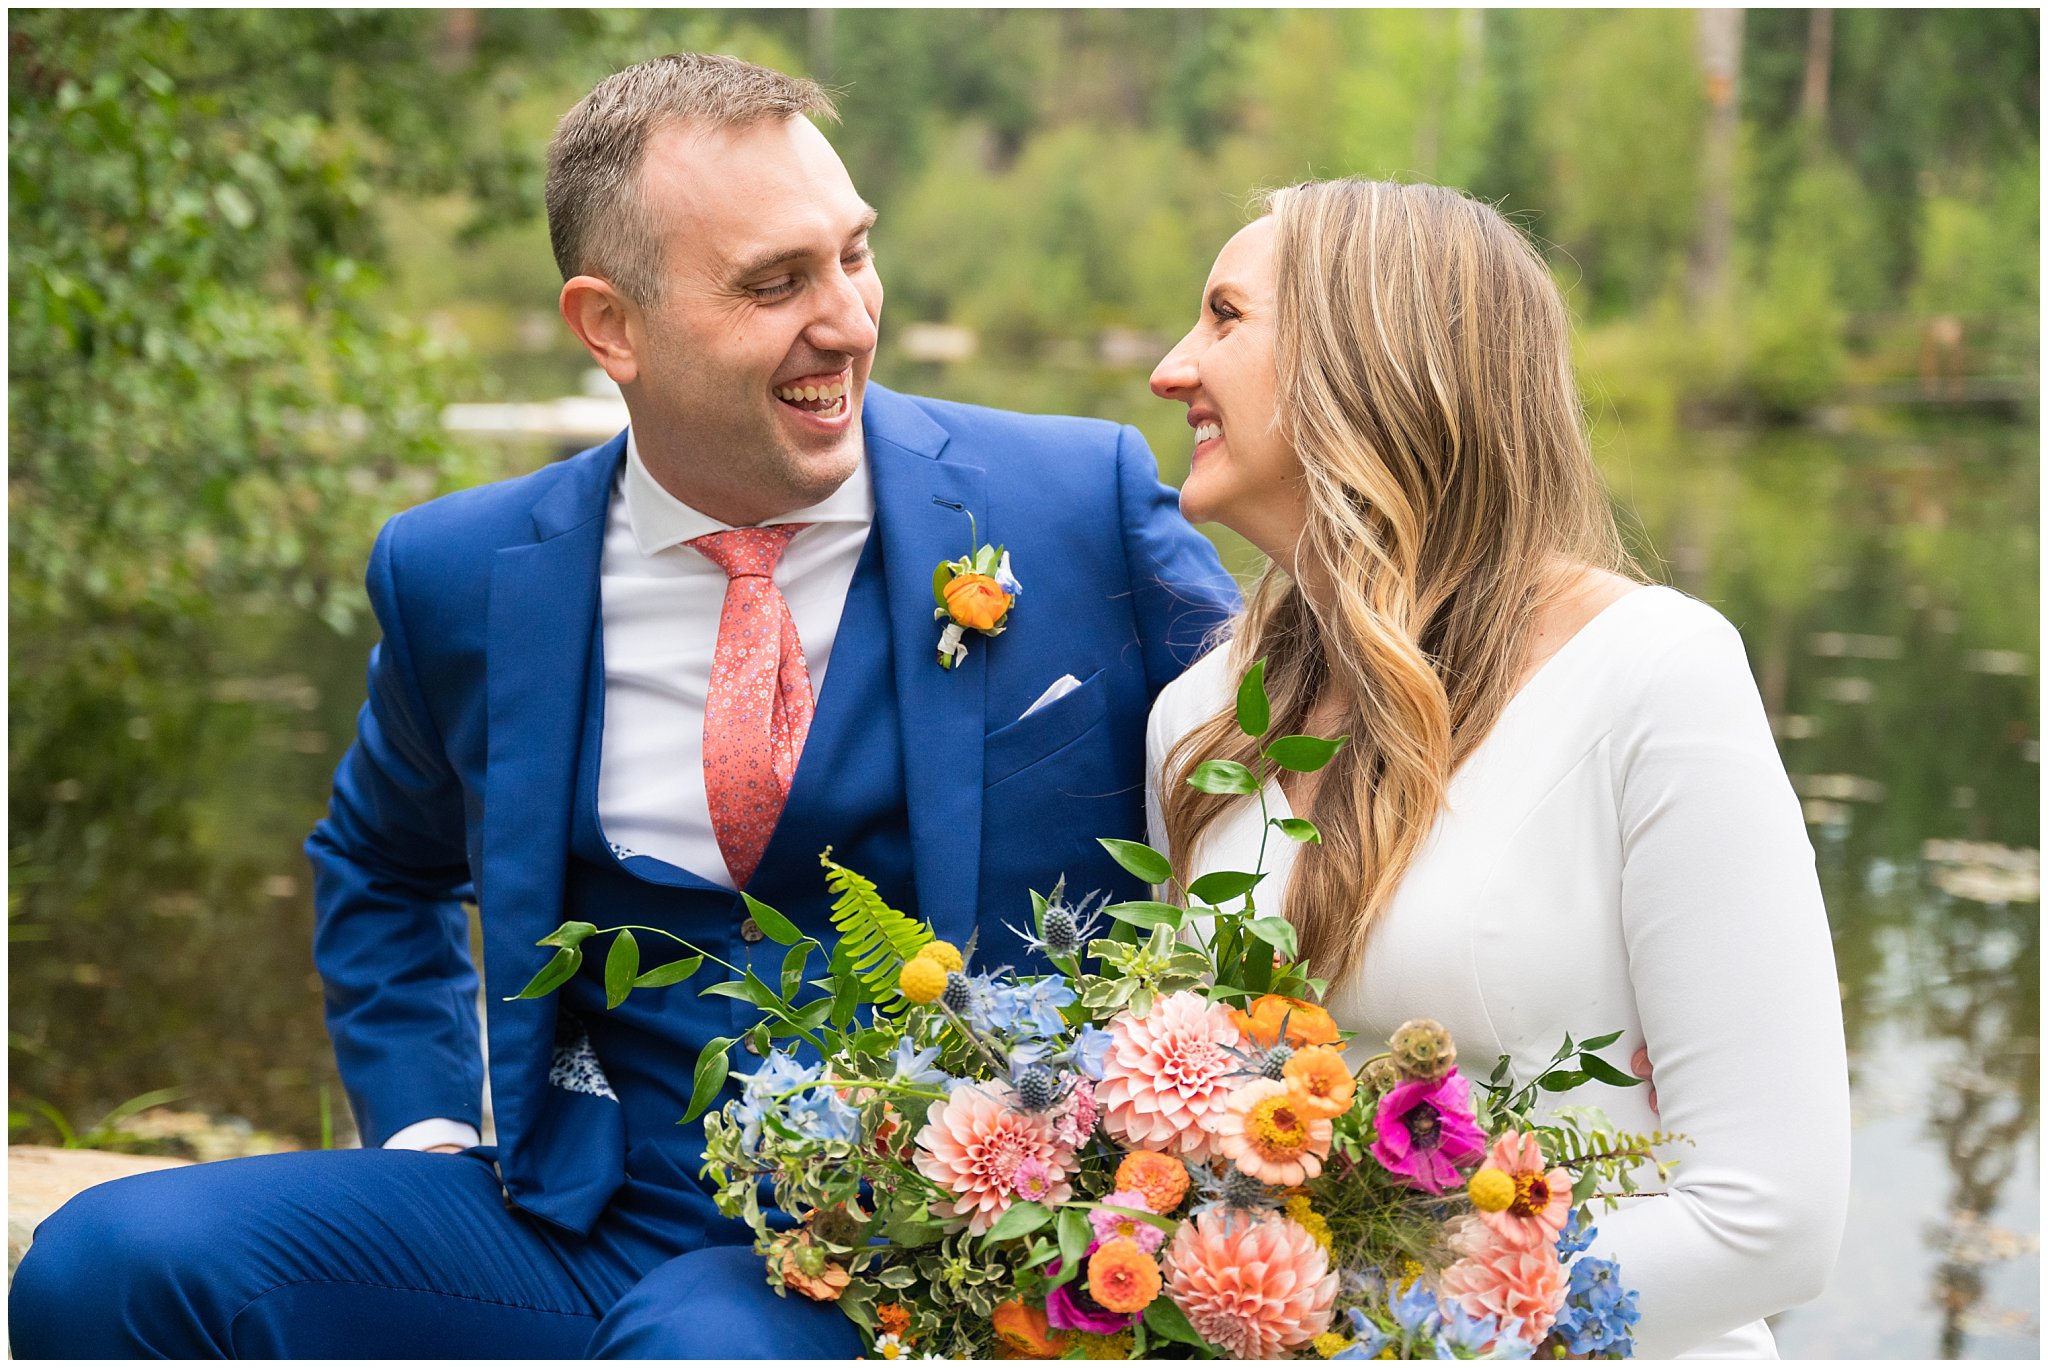 Bride and groom portraits with an elegant fitted dress and blue suit with coral tie, and wildflower bouquet in the Montana forest and near a pond | Mountainside Weddings Kalispell Montana Destination Wedding | Jessie and Dallin Photography